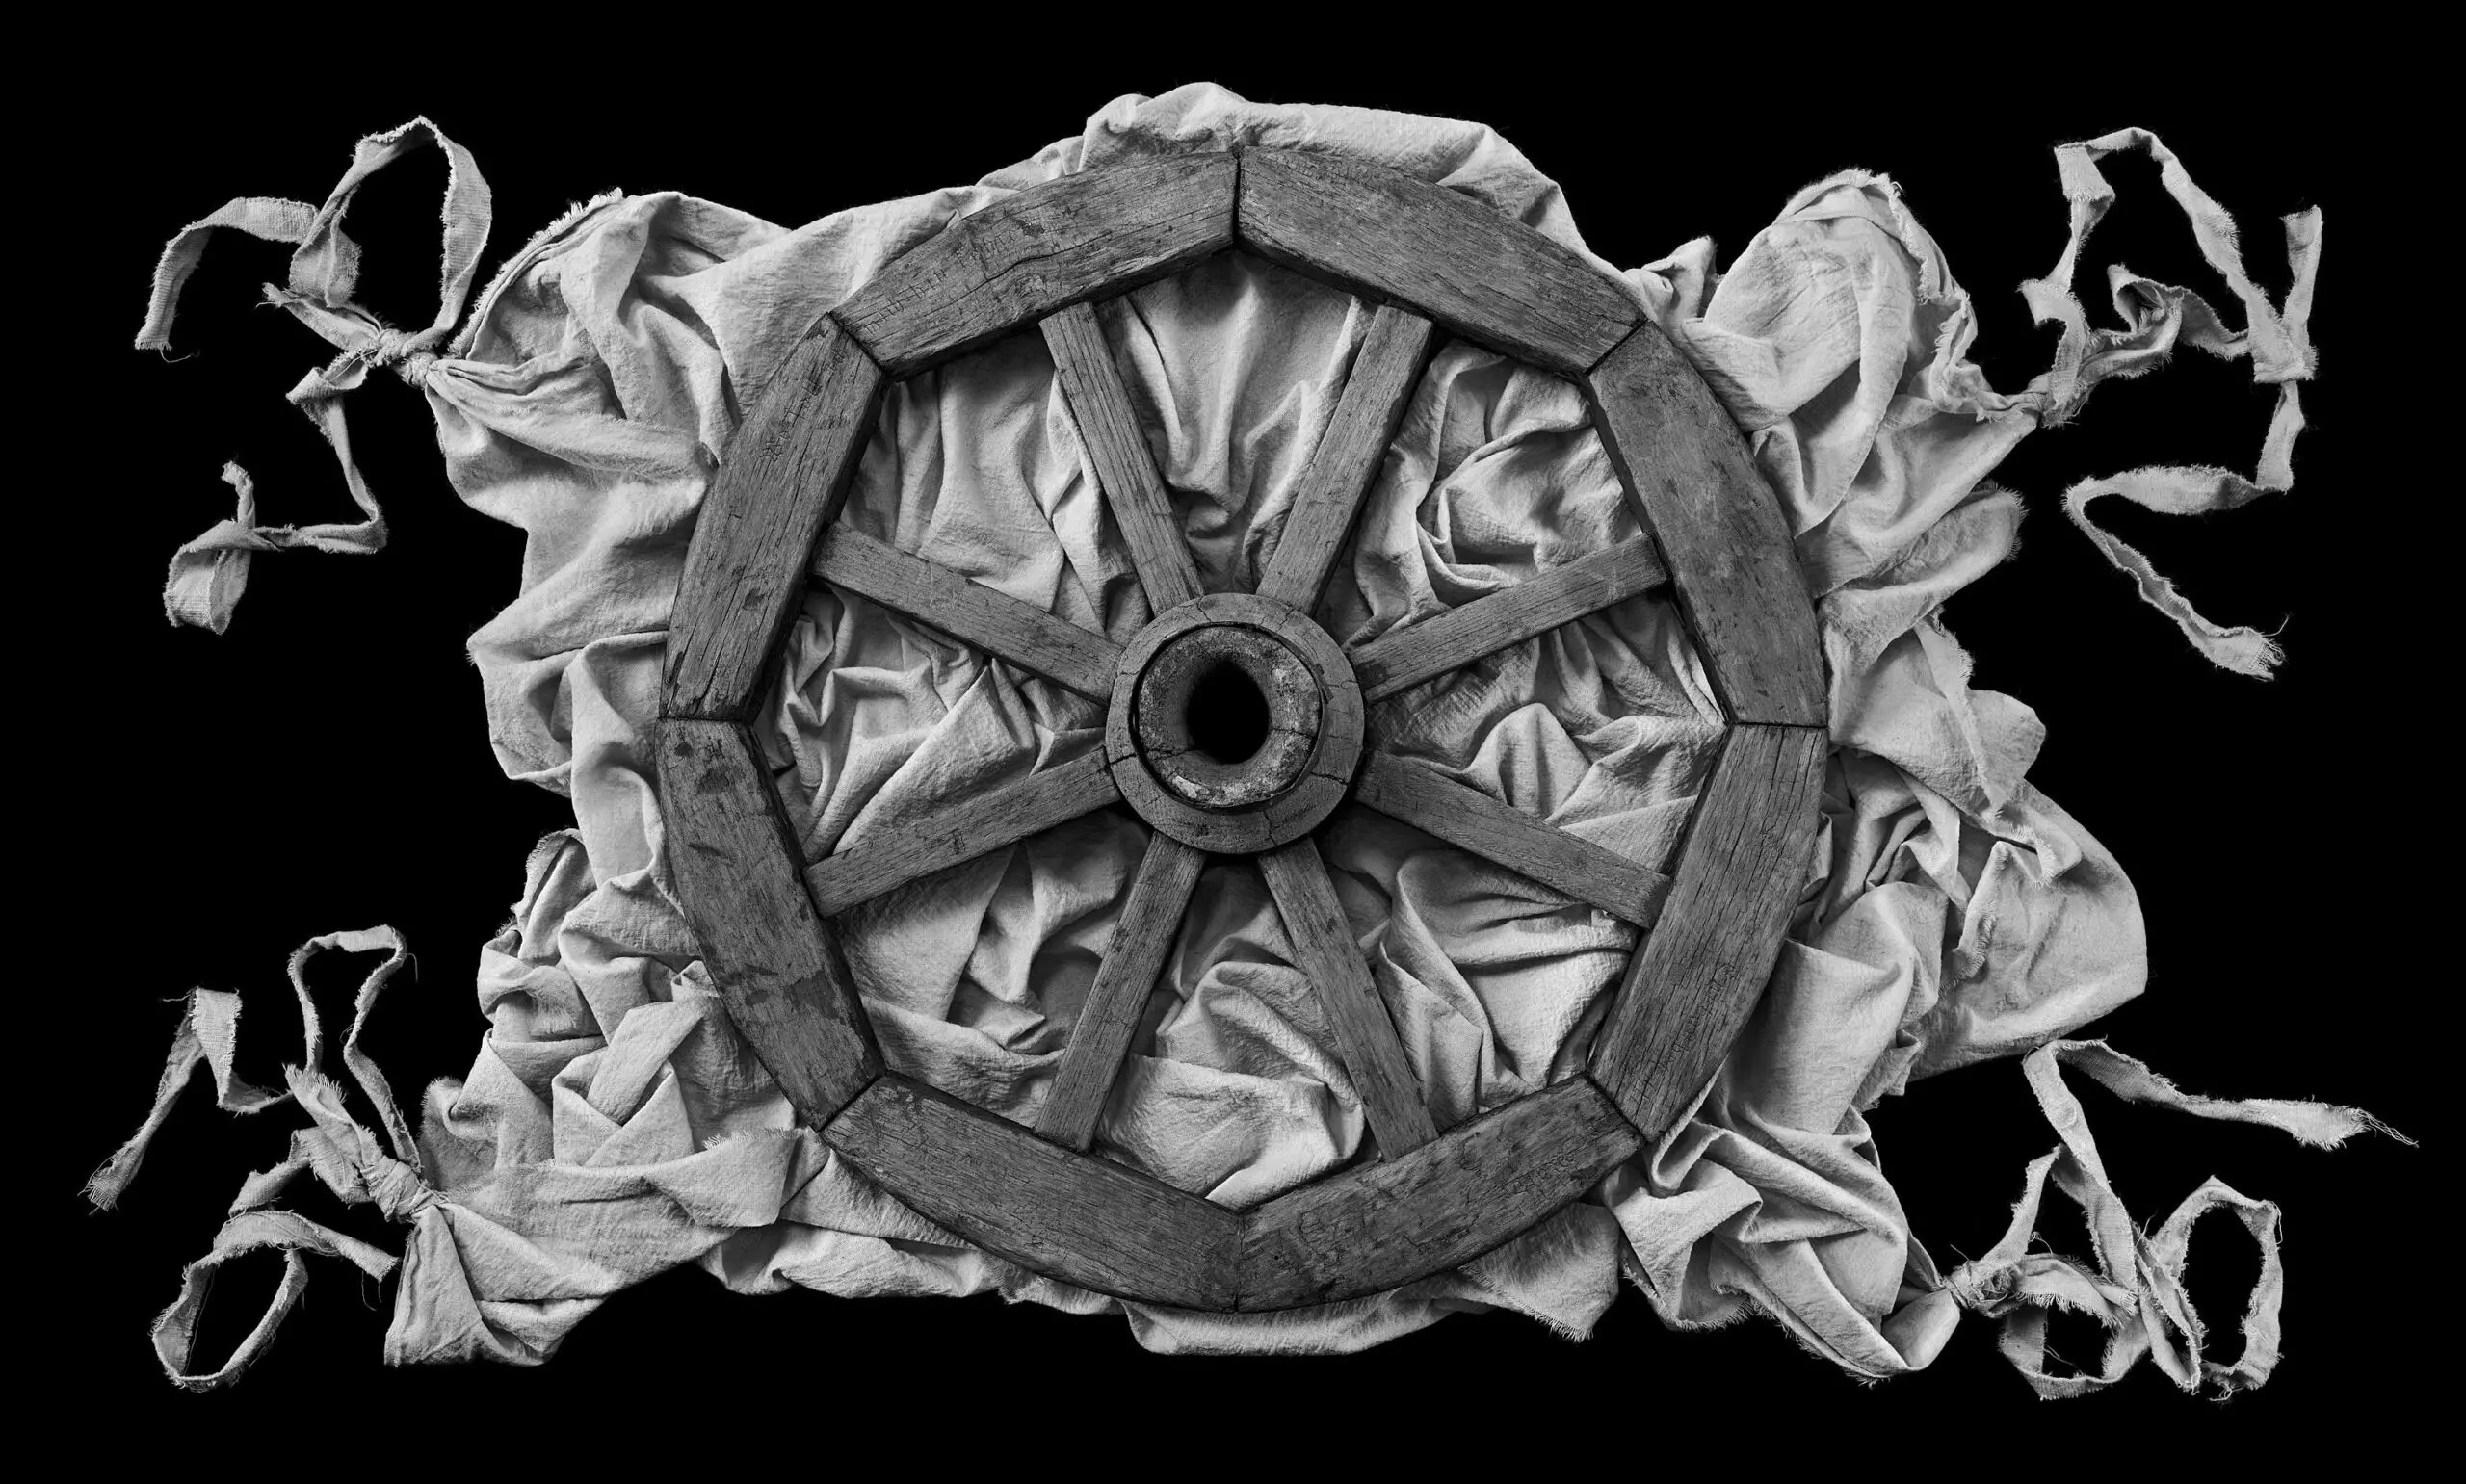 Stephen Althouse, Wheel I, 2008, archival pigment print, 59.5 x 88 inches